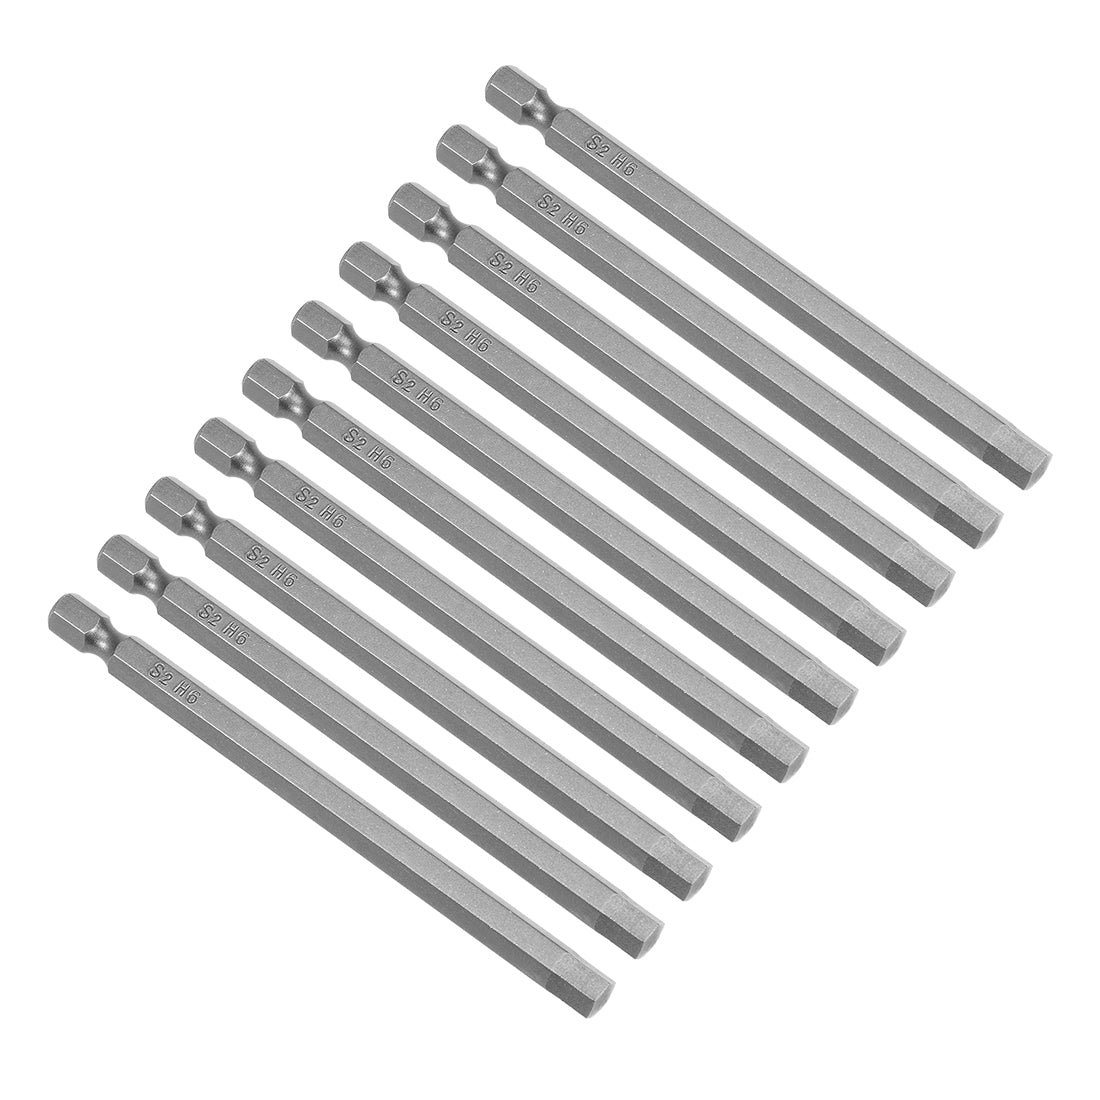 uxcell Uxcell 10Pcs 1/4" Hex Shank 100mm Length Magnetic Hex Head H6 Screwdriver Bits S2 Alloy Steel